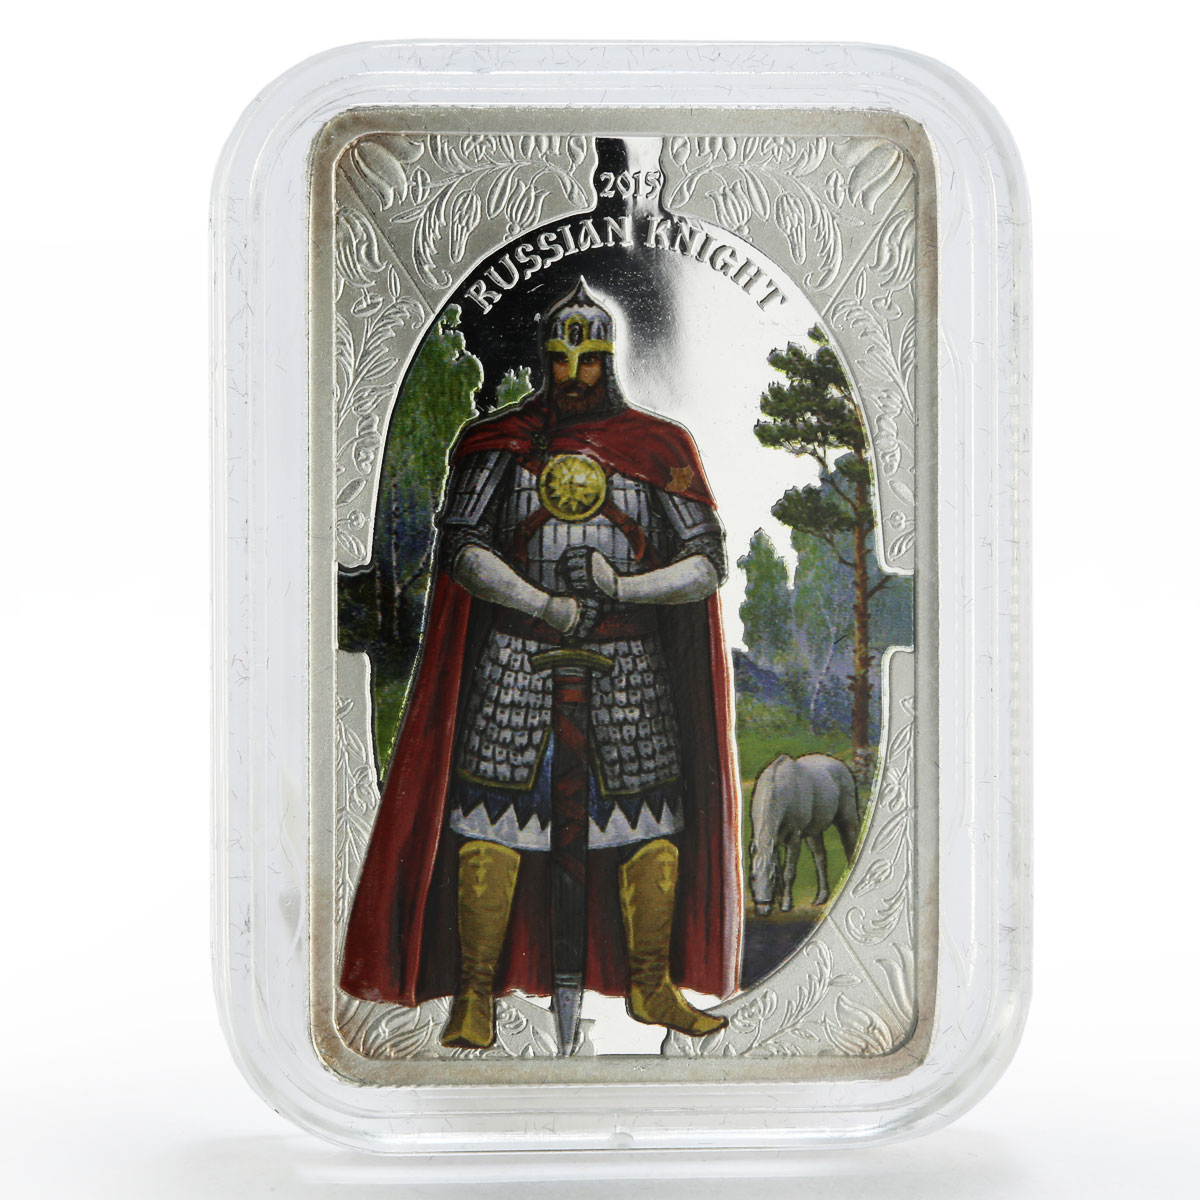 Benin 1000 francs Russian Knight colored silver coin 2015